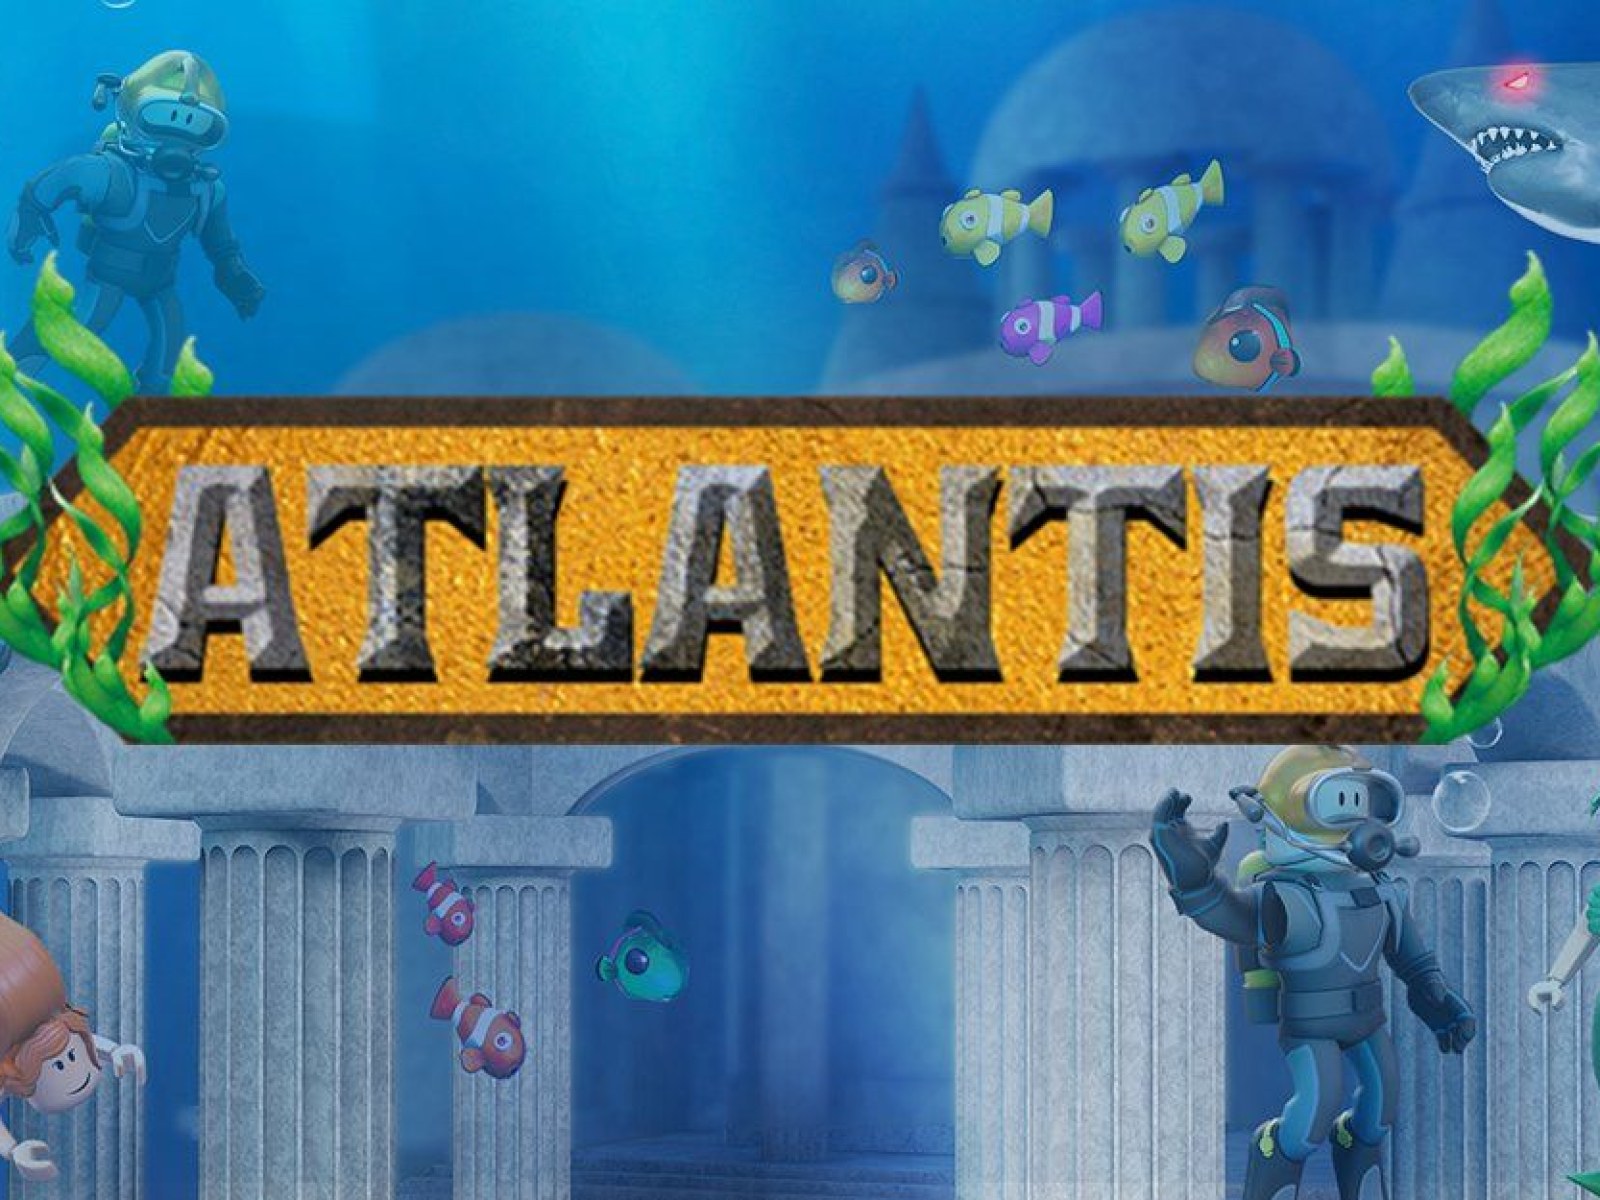 Roblox Atlantis Event Guide How To Get Atlantean Pauldrons And Tiara In Disaster Island Walkthrough - roblox event list 2018roblox players only youtube